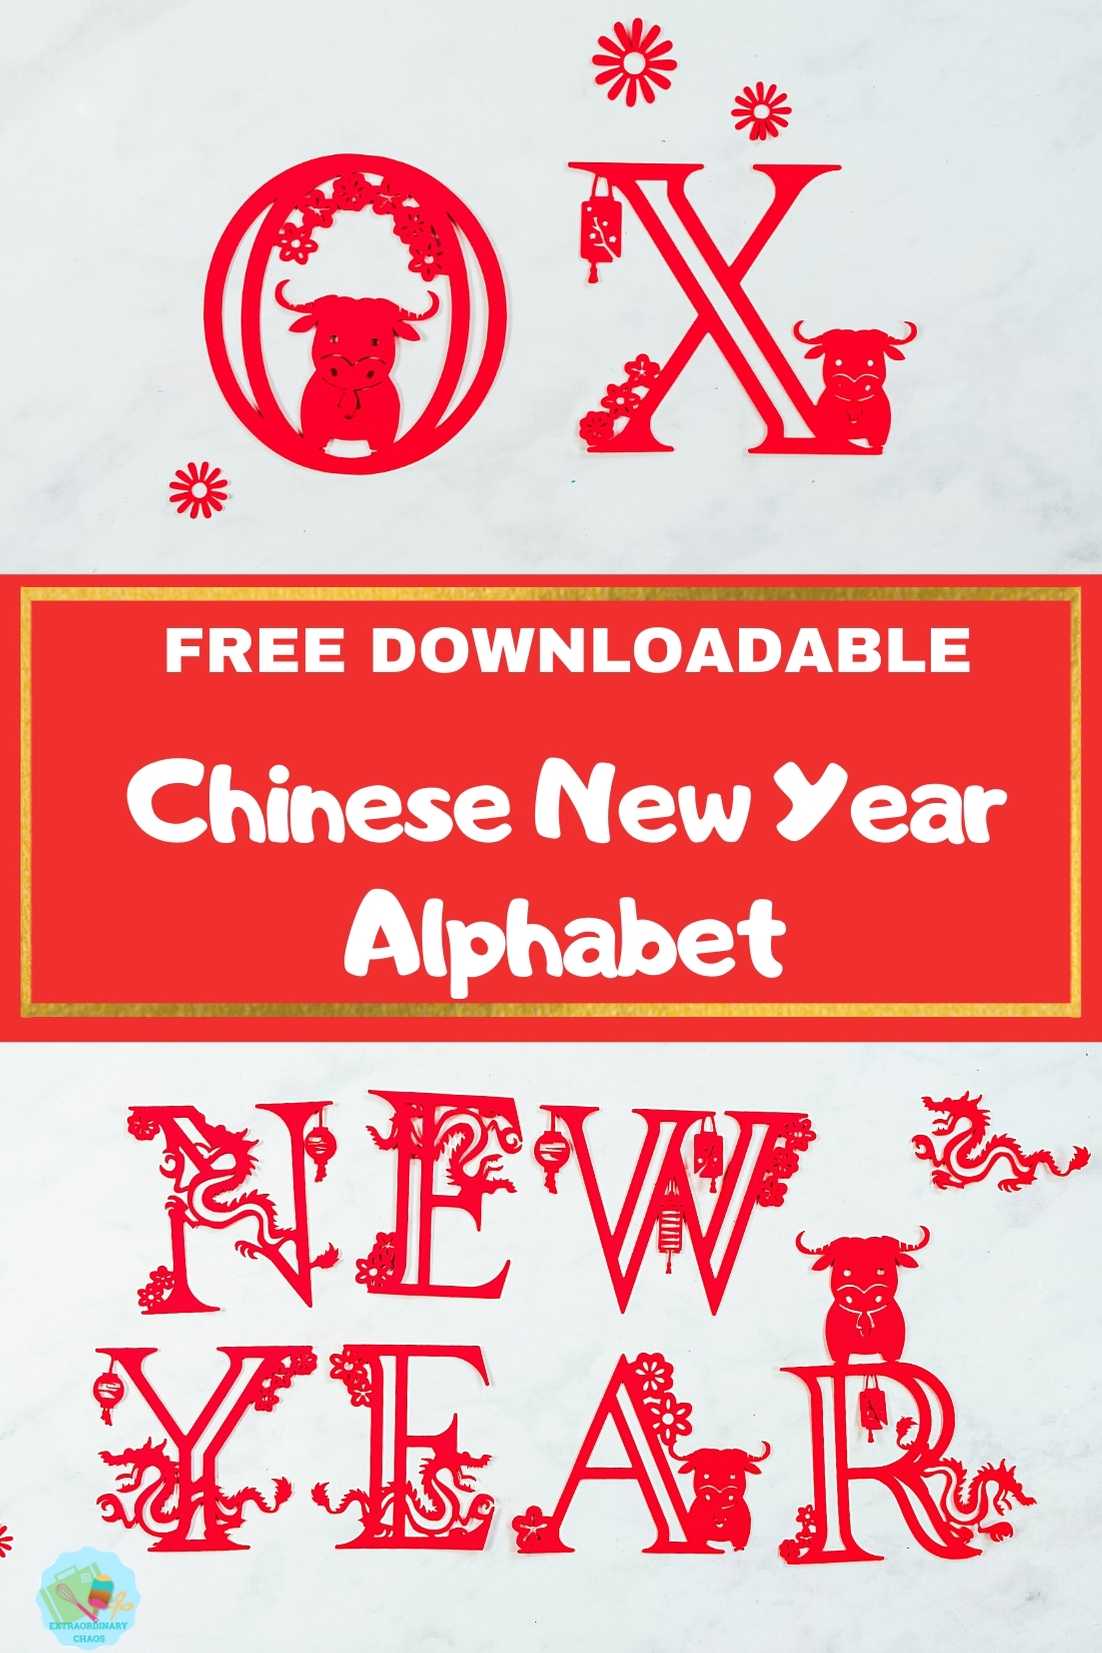 Free Downloadable Chinese New Year Alphabet For Cricut Craft Projects